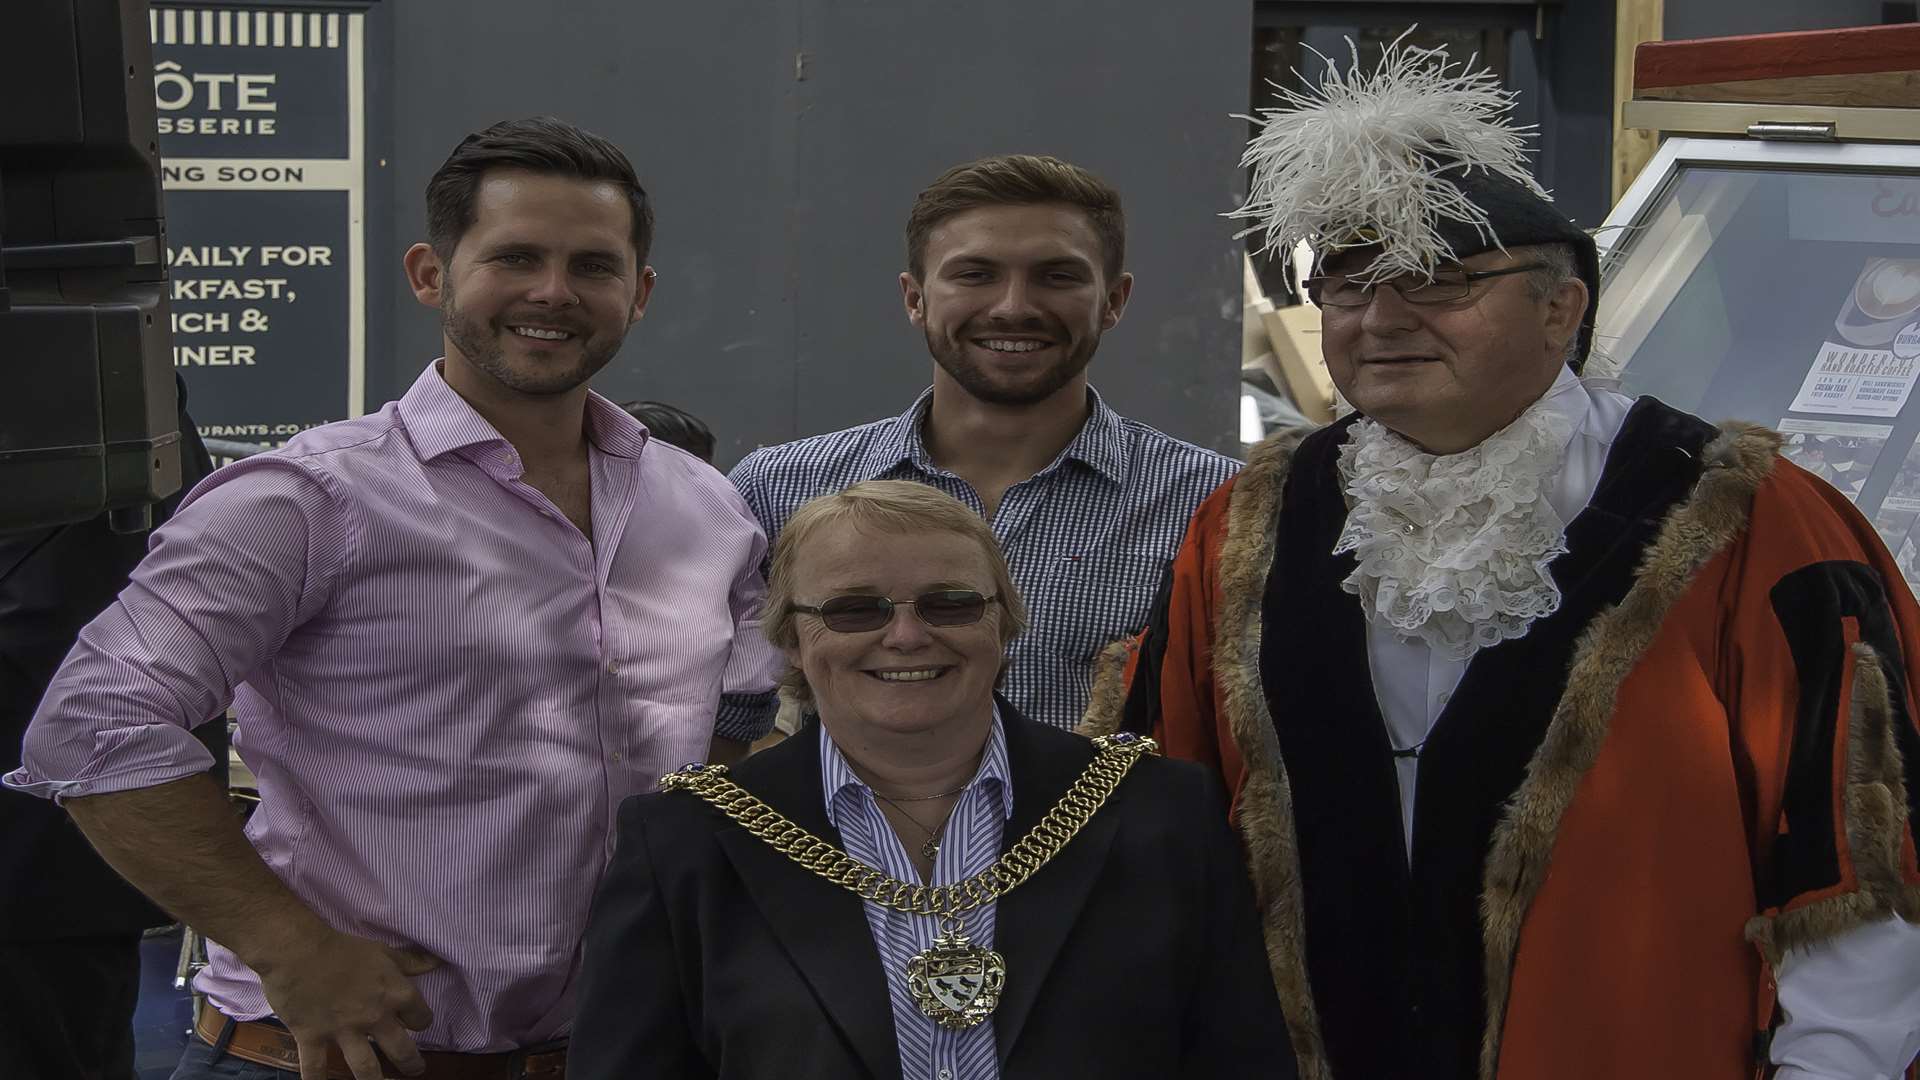 Peter Langdown on the left with the Mayor of Canterbury Sally Waters